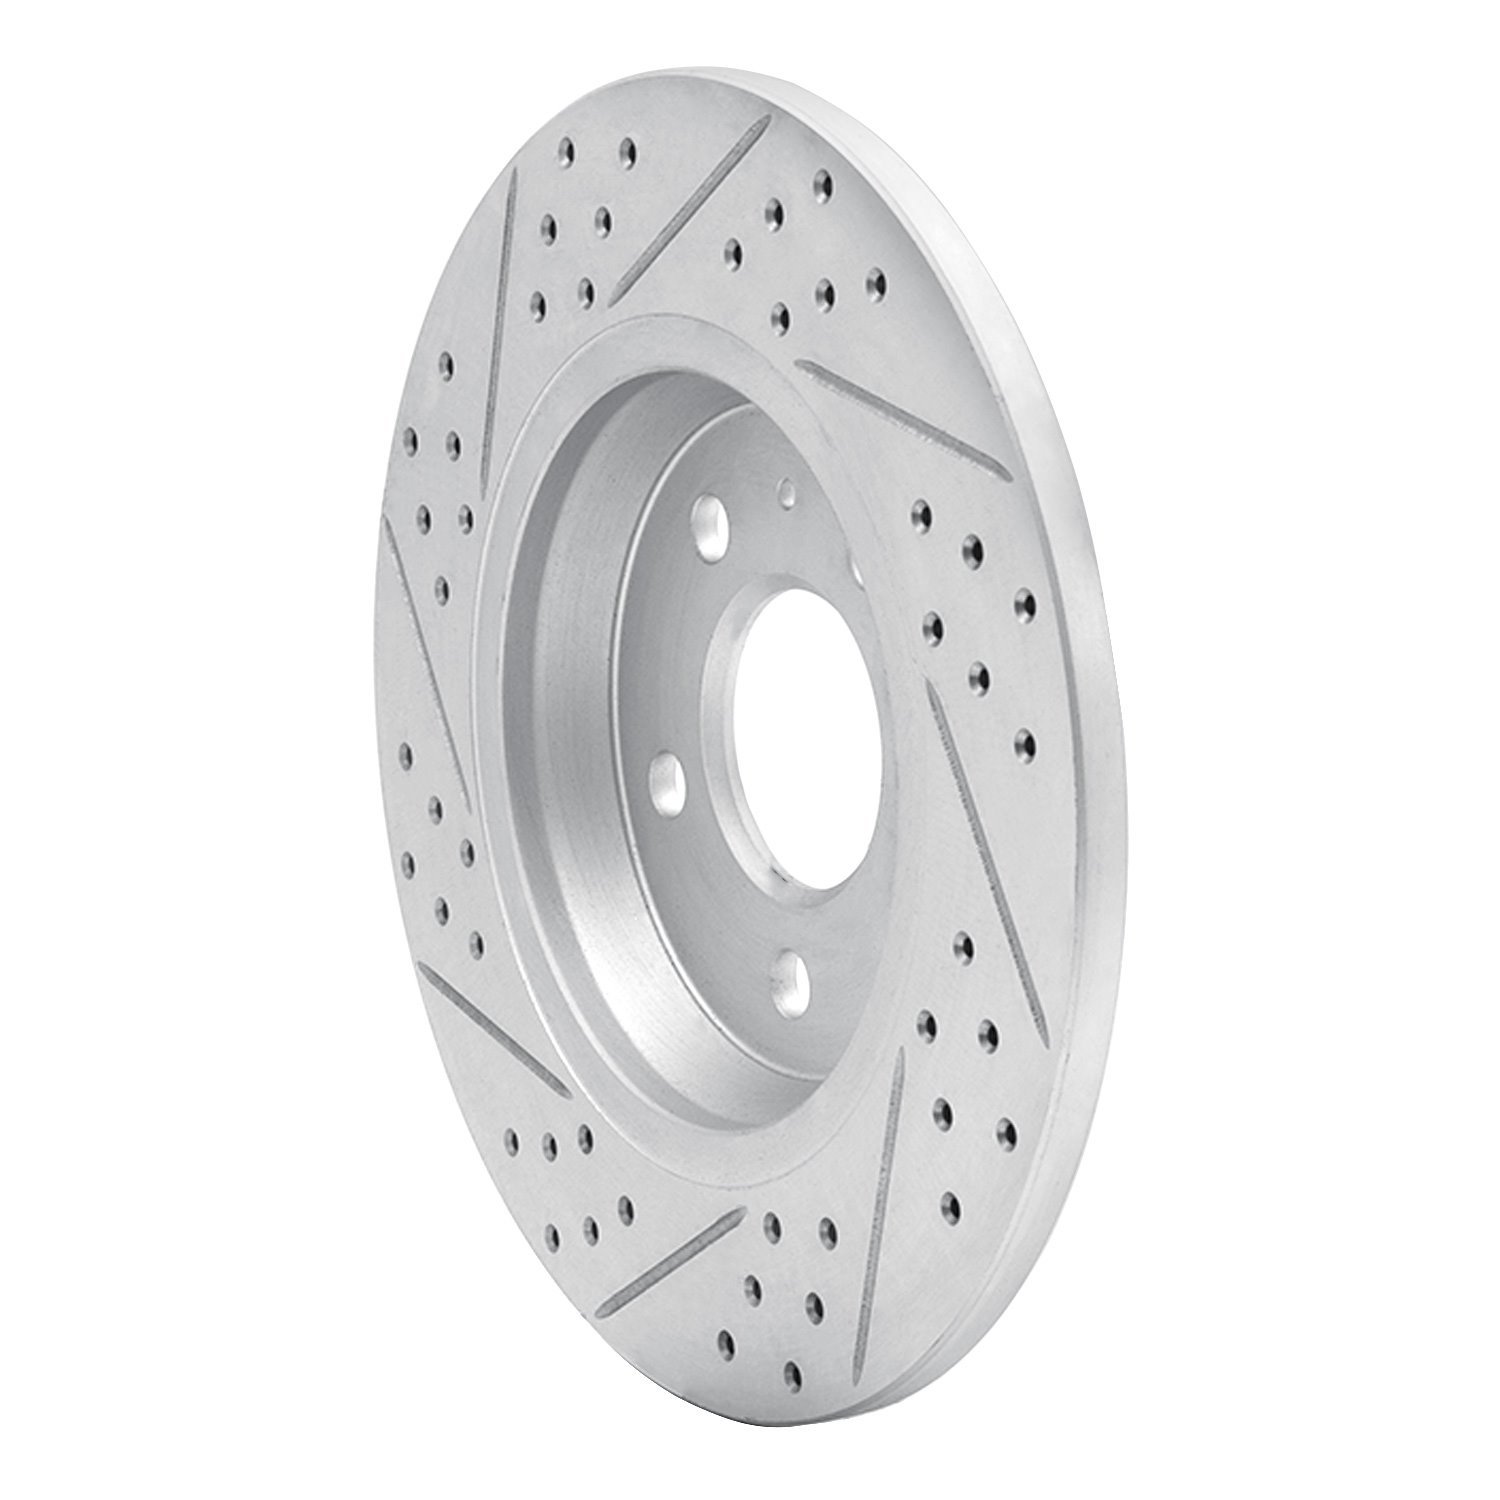 830-73061R Geoperformance Drilled/Slotted Brake Rotor, Fits Select Audi/Volkswagen, Position: Rear Right